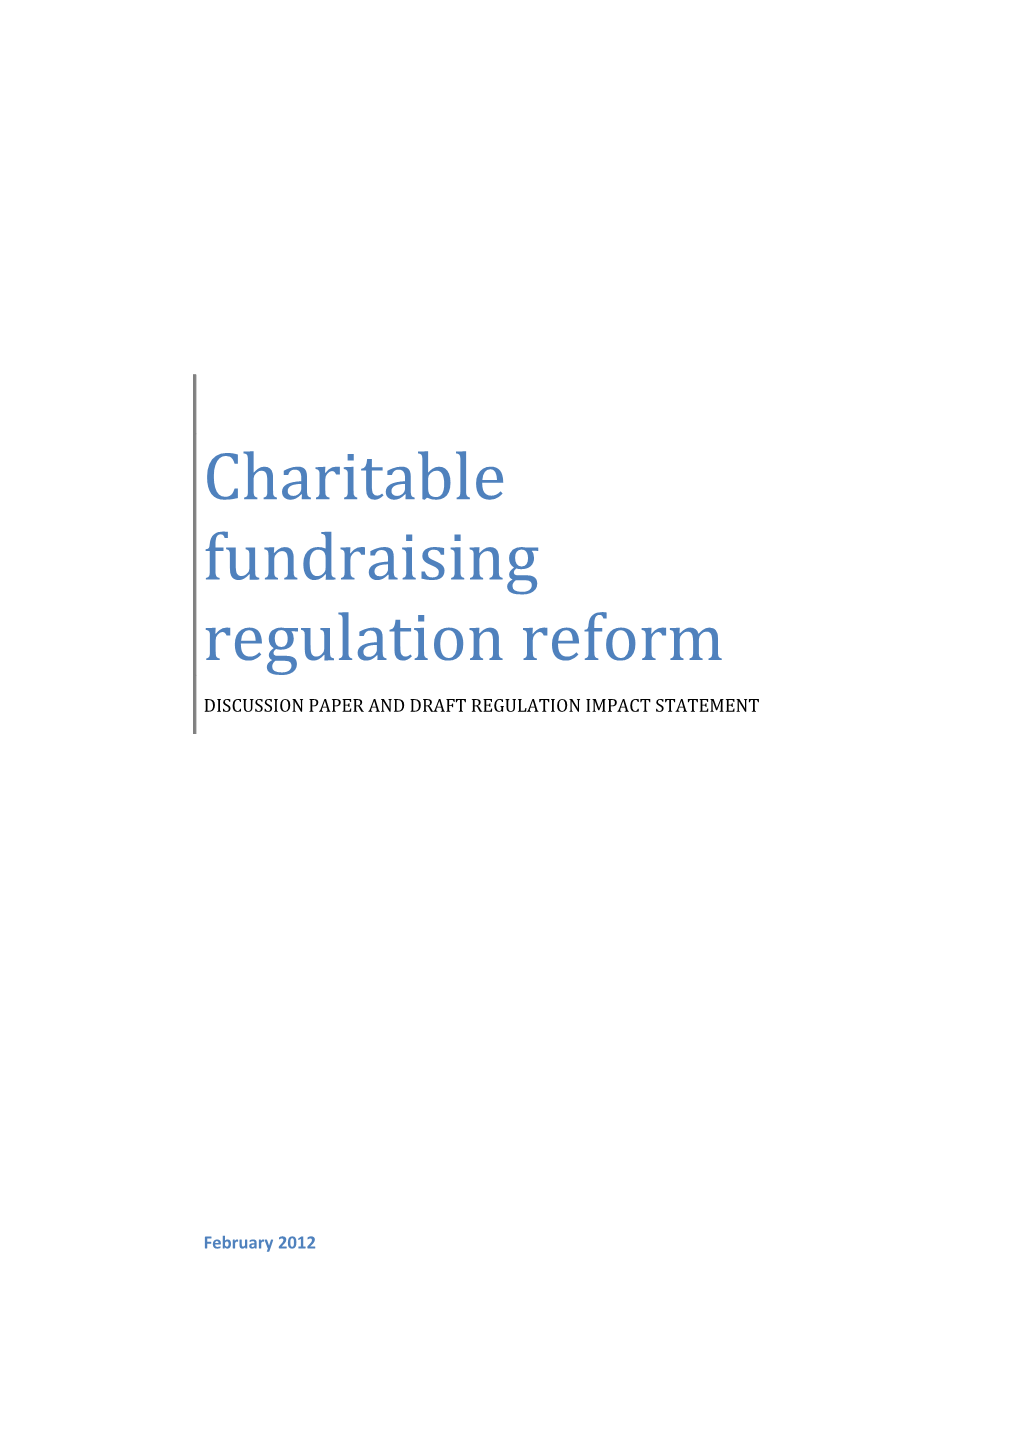 Charitable Fundraising Regulation Reform: Discussion Paper and Regulation Impact Statement